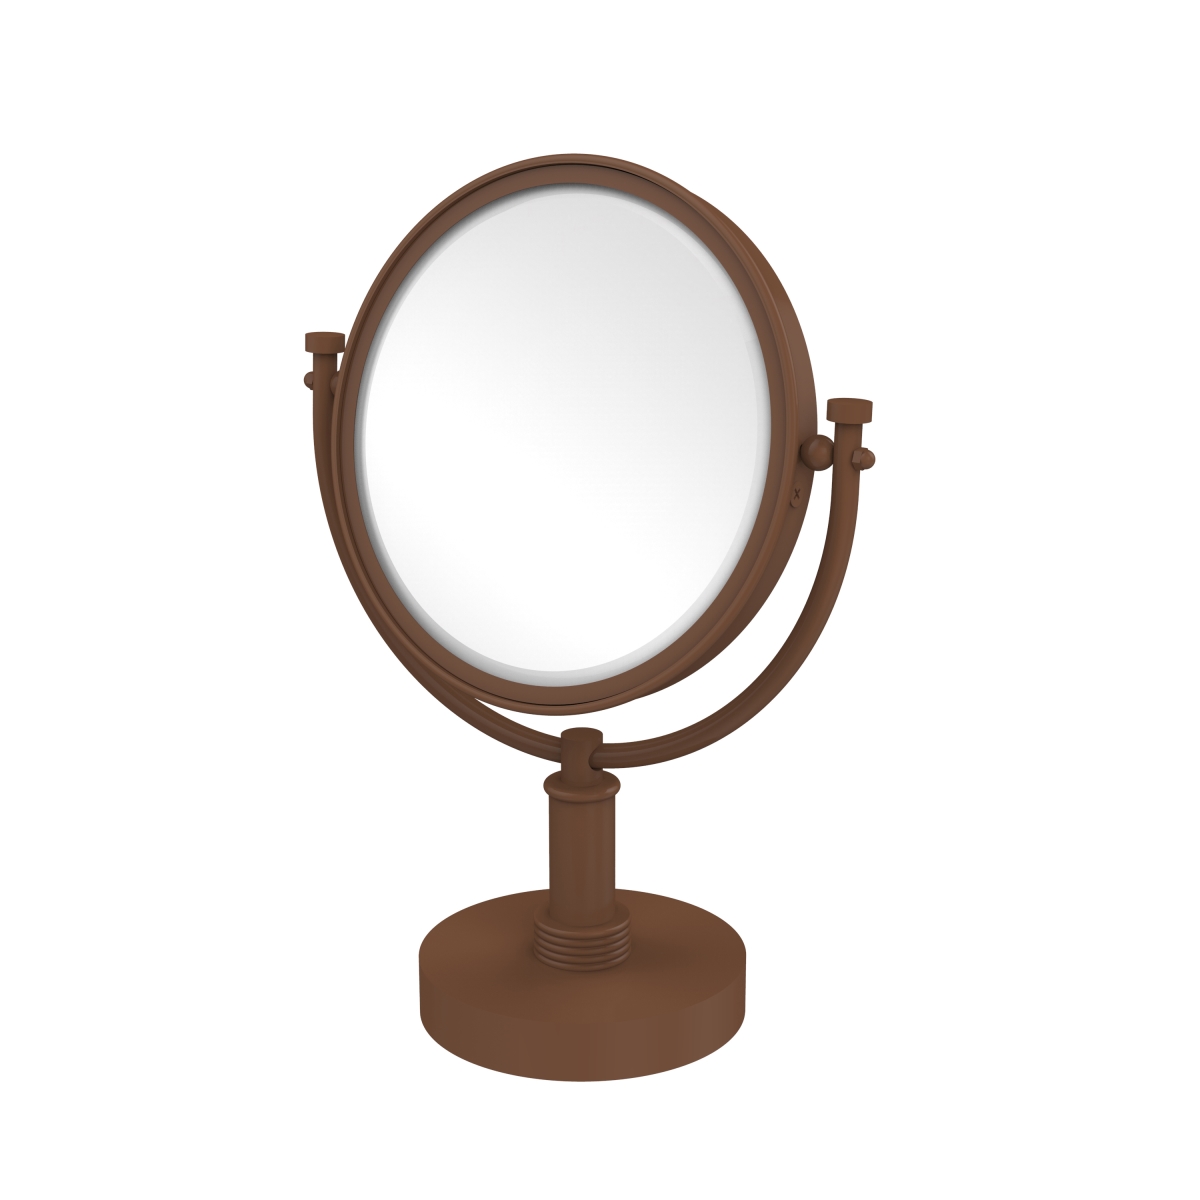 Dm-4g-2x-abz Grooved Ring Style 8 In. Vanity Top Make-up Mirror 2x Magnification, Antique Bronze